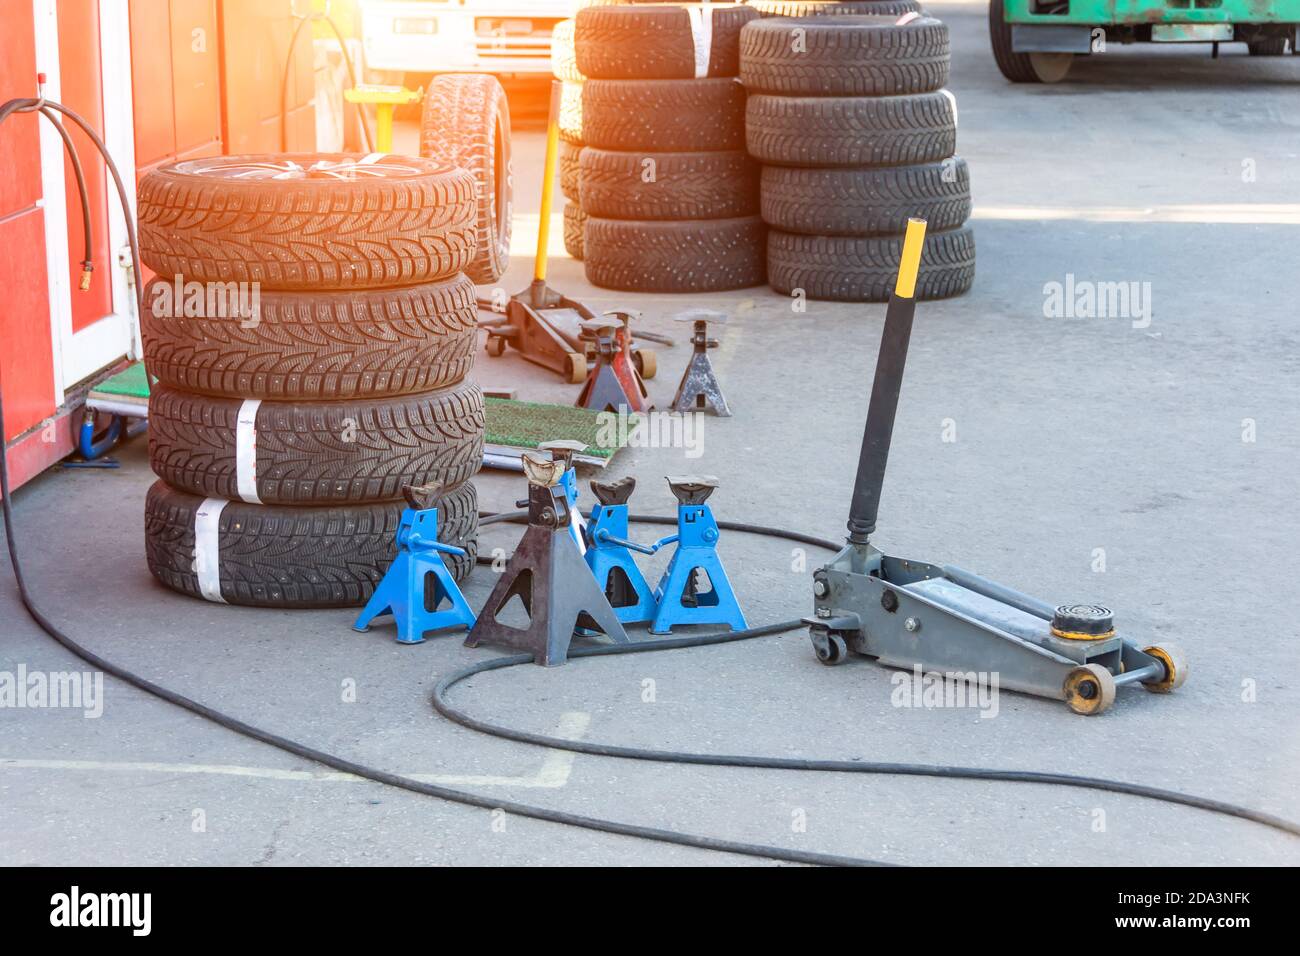 Jack for lifting a car body to replace tires on wheels Stock Photo